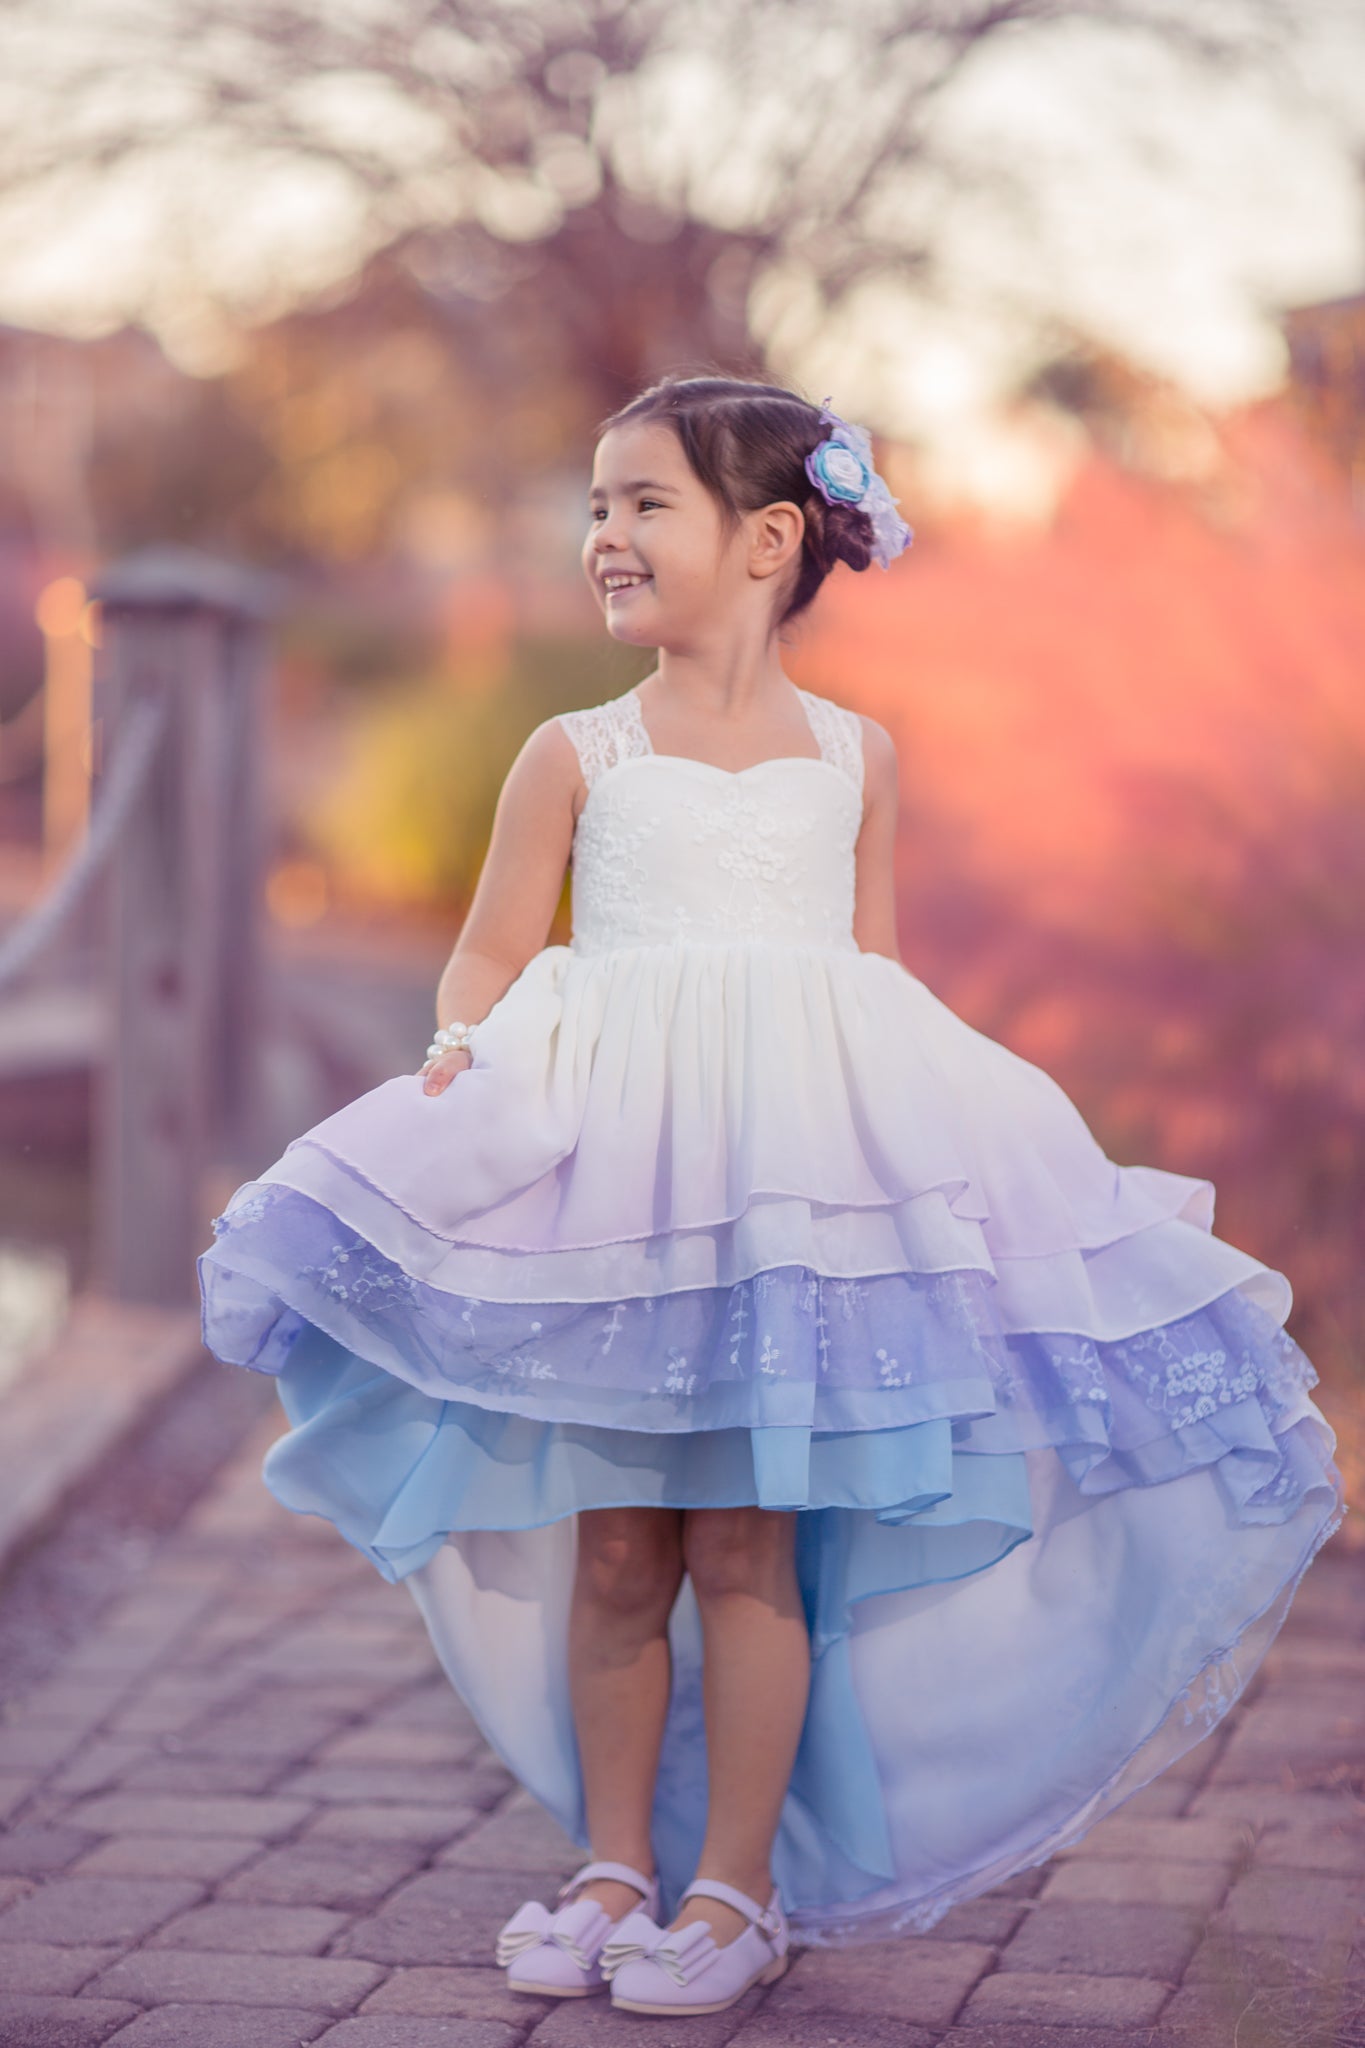 Dress Your Little Princess in Style with LilaxShop's Girls Bottoms